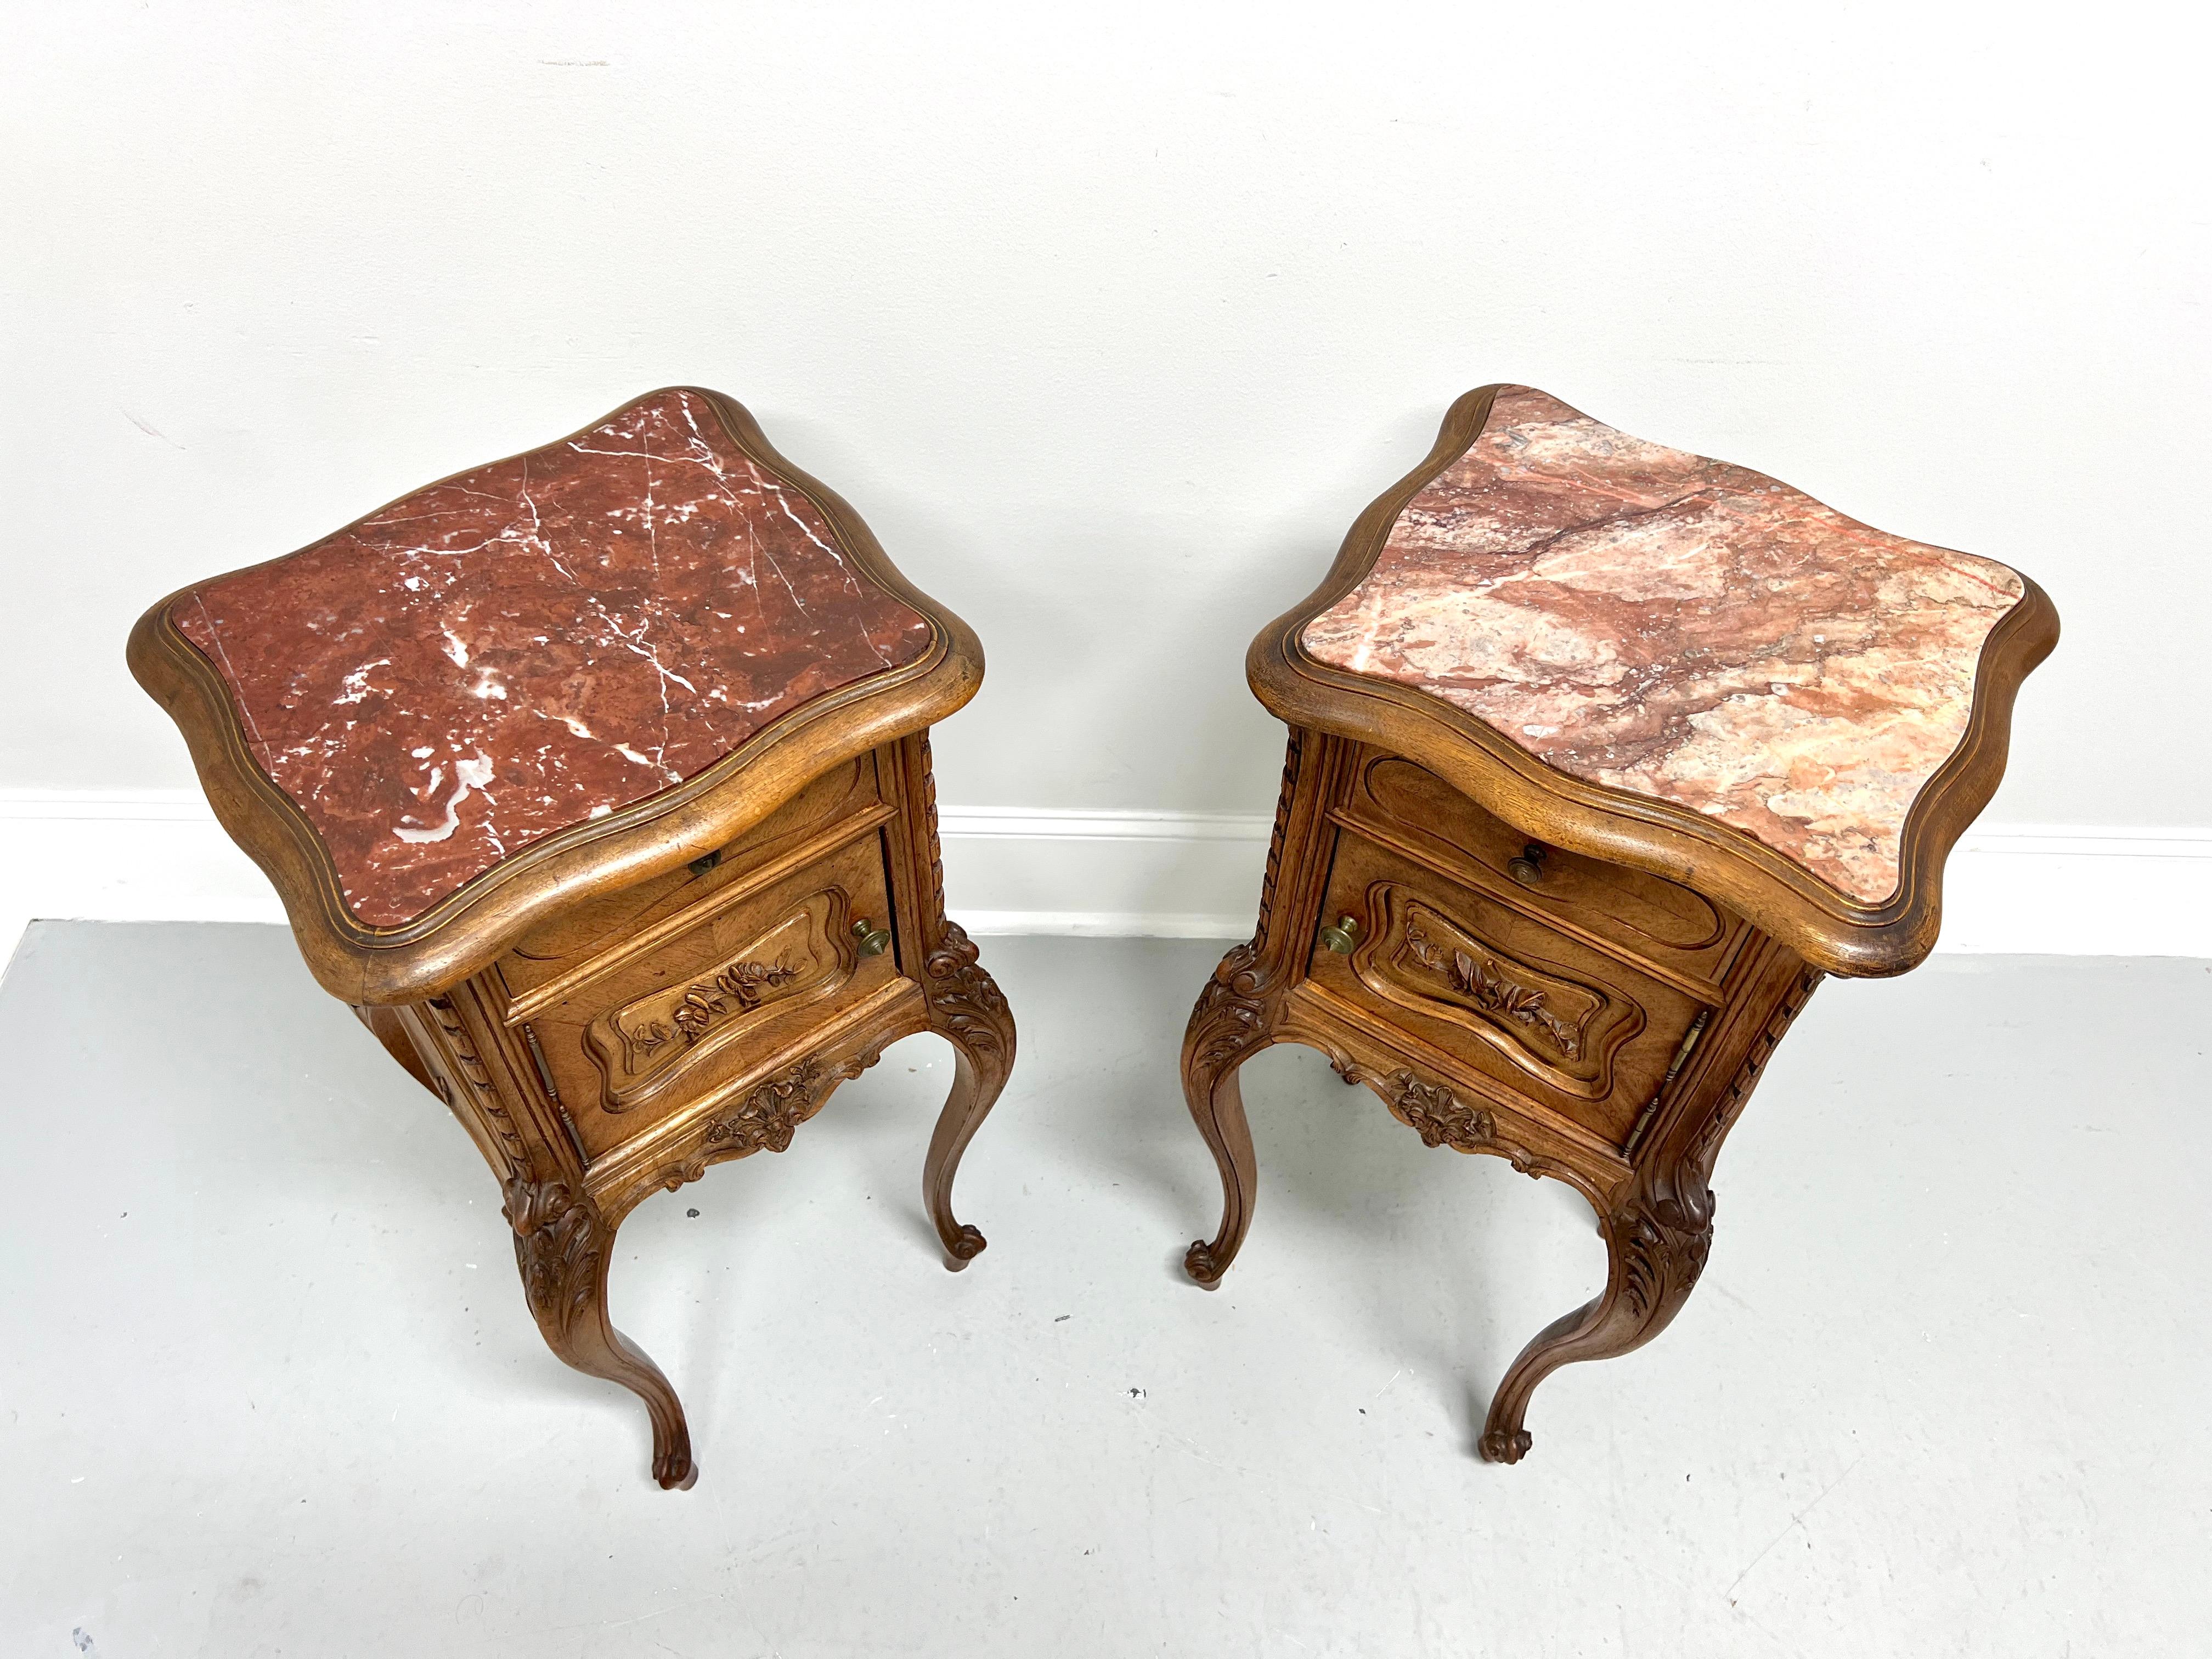 A pair of antique Early 20th Century French Country Louis XV style marble top commodes, unbranded. Chestnut with inset pink marble top, serpentine shape to bevel edge top, elaborately carved details, brass hardware, tall cabriole legs, and scroll